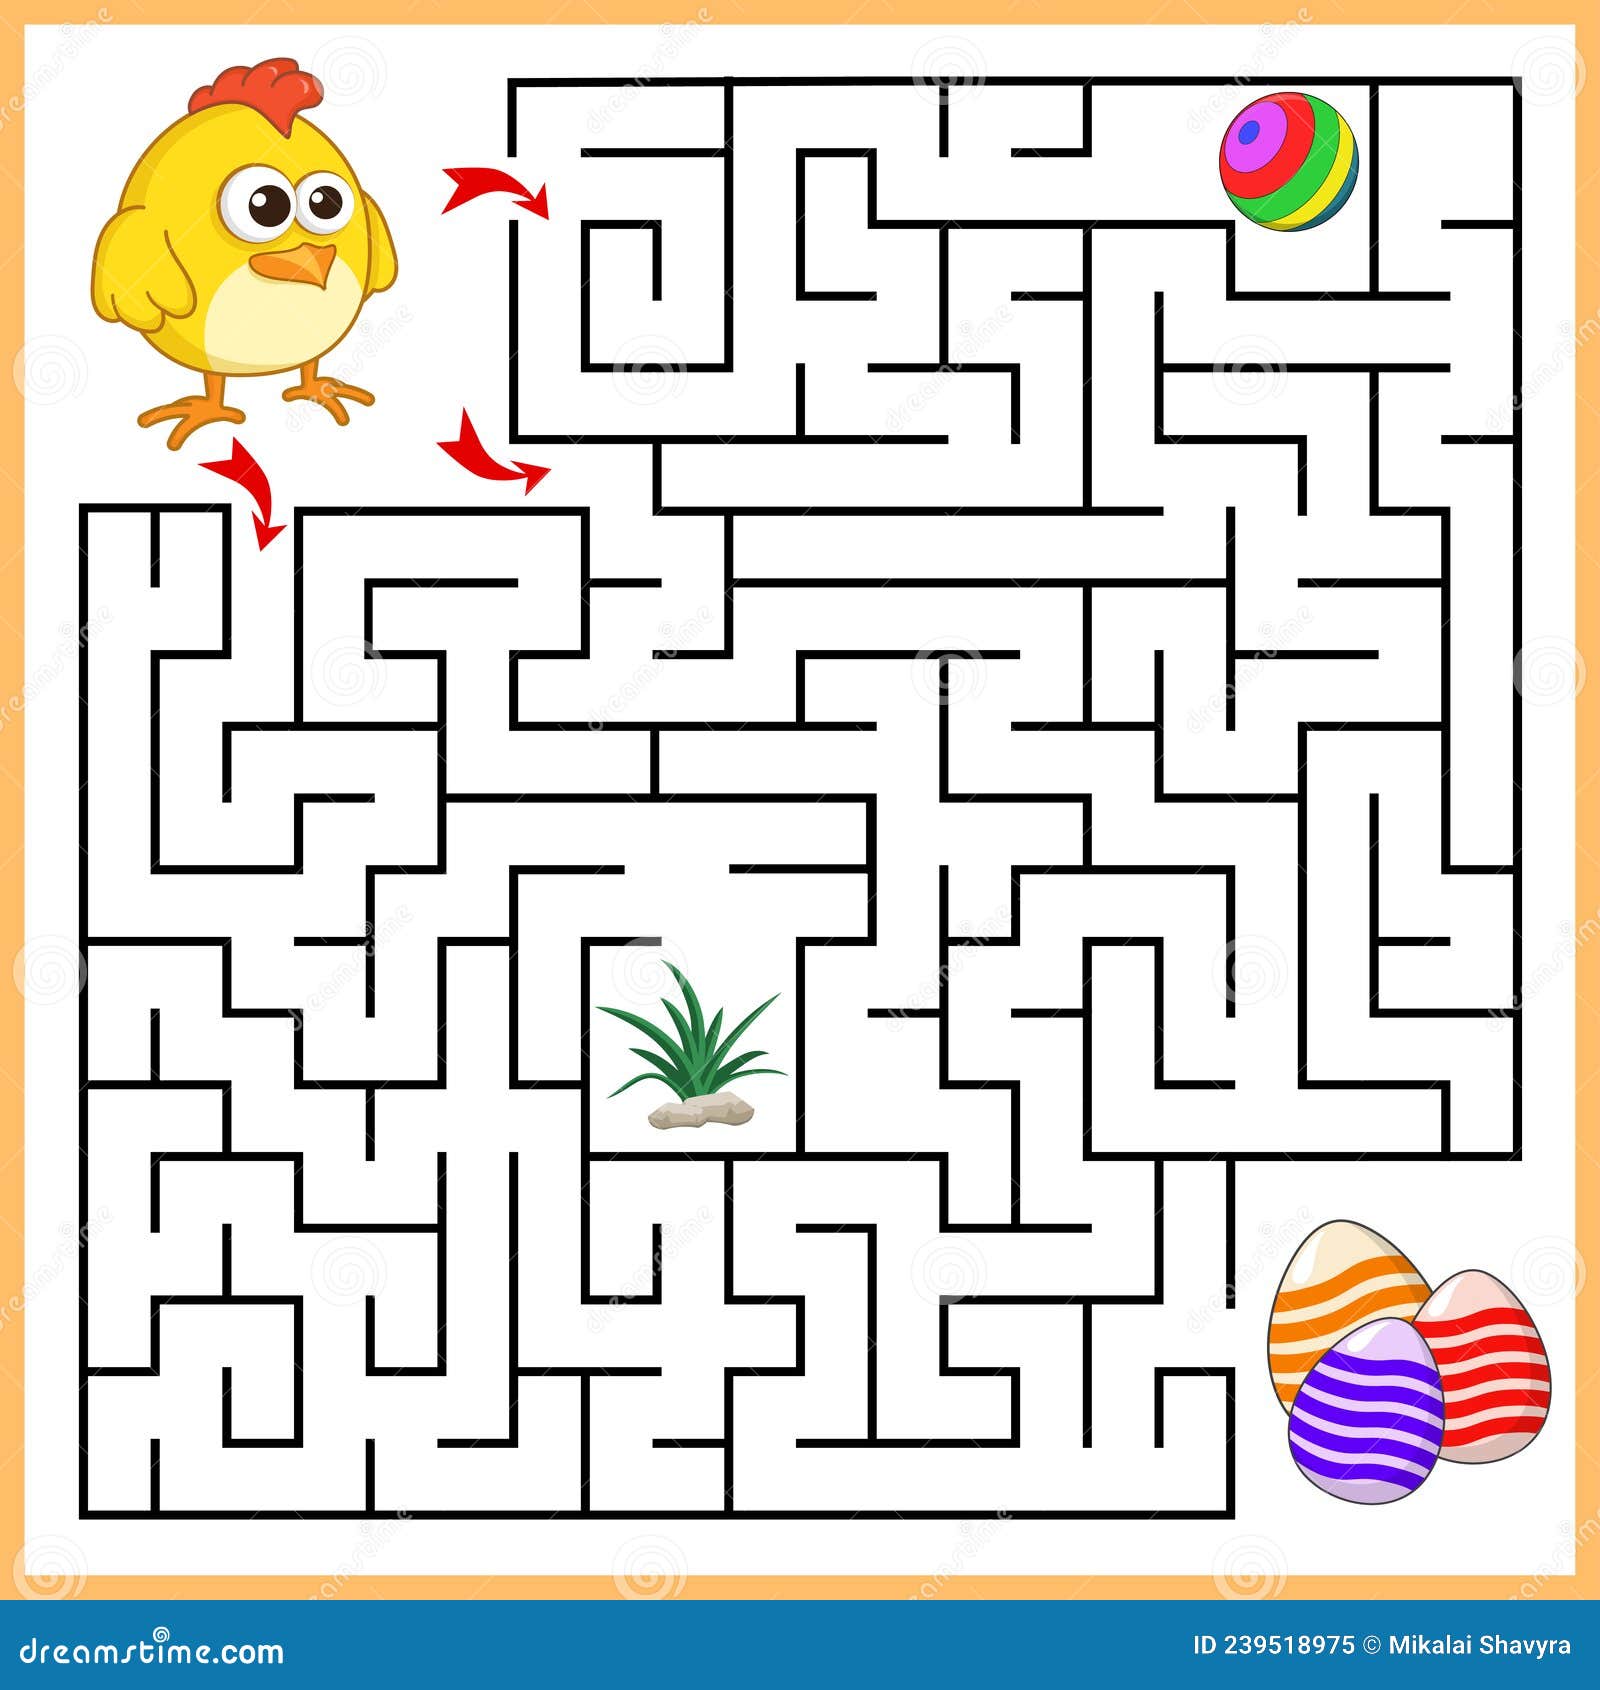 help chicken to find the right path to eggs, ball, grass. 3 entrances, 3 way. square maze game with solution. answer